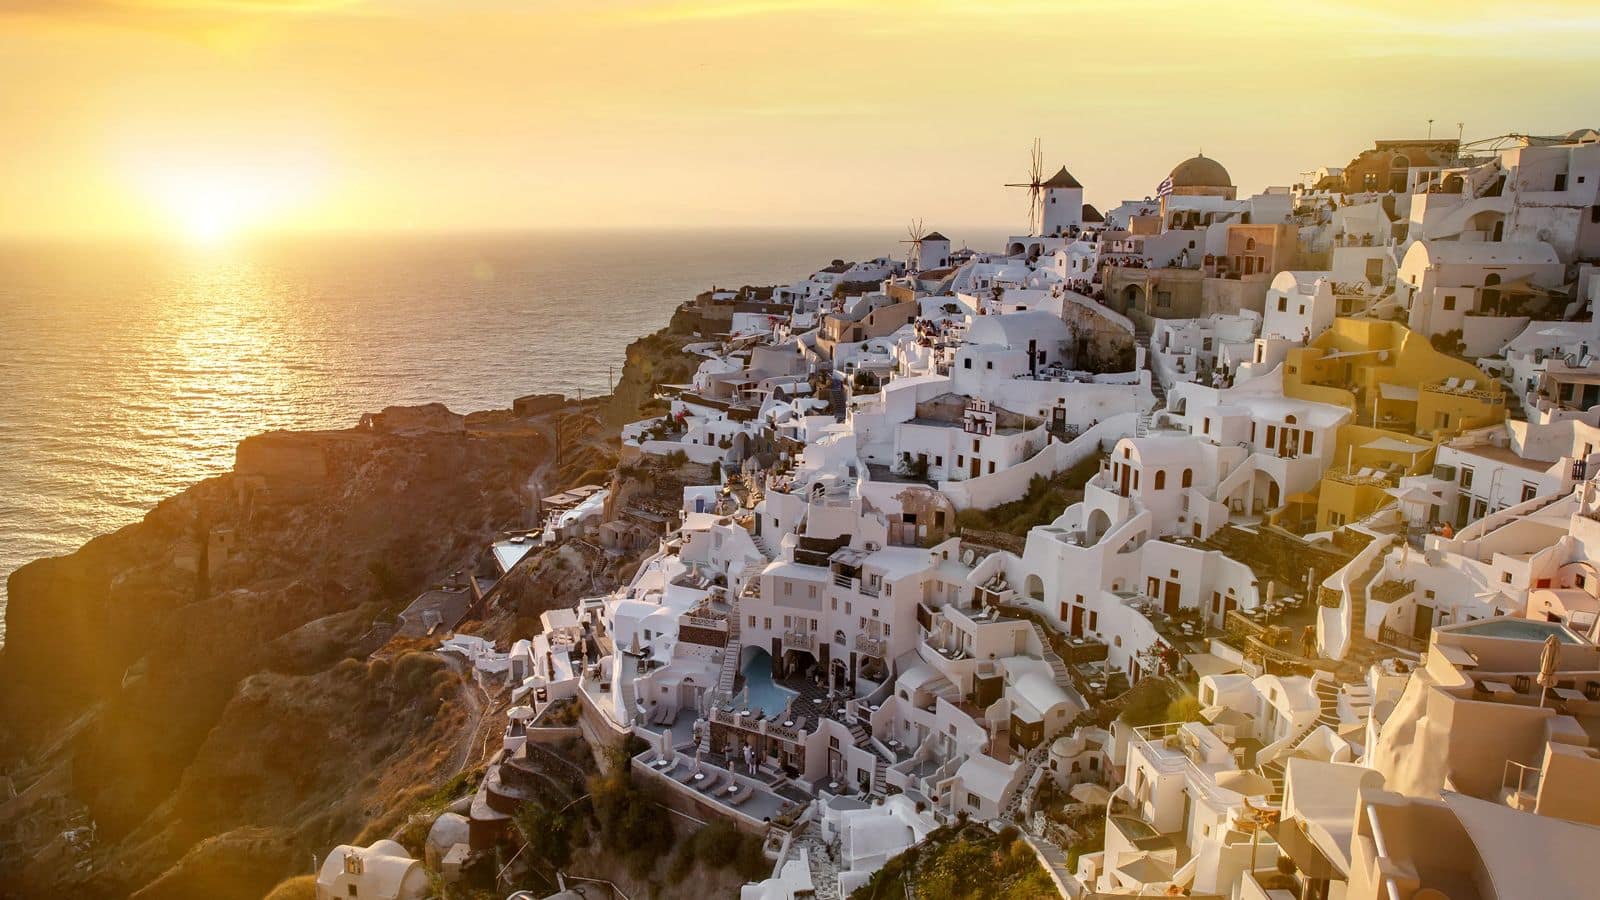 Head over to Santorini's hidden charms with this travel guide